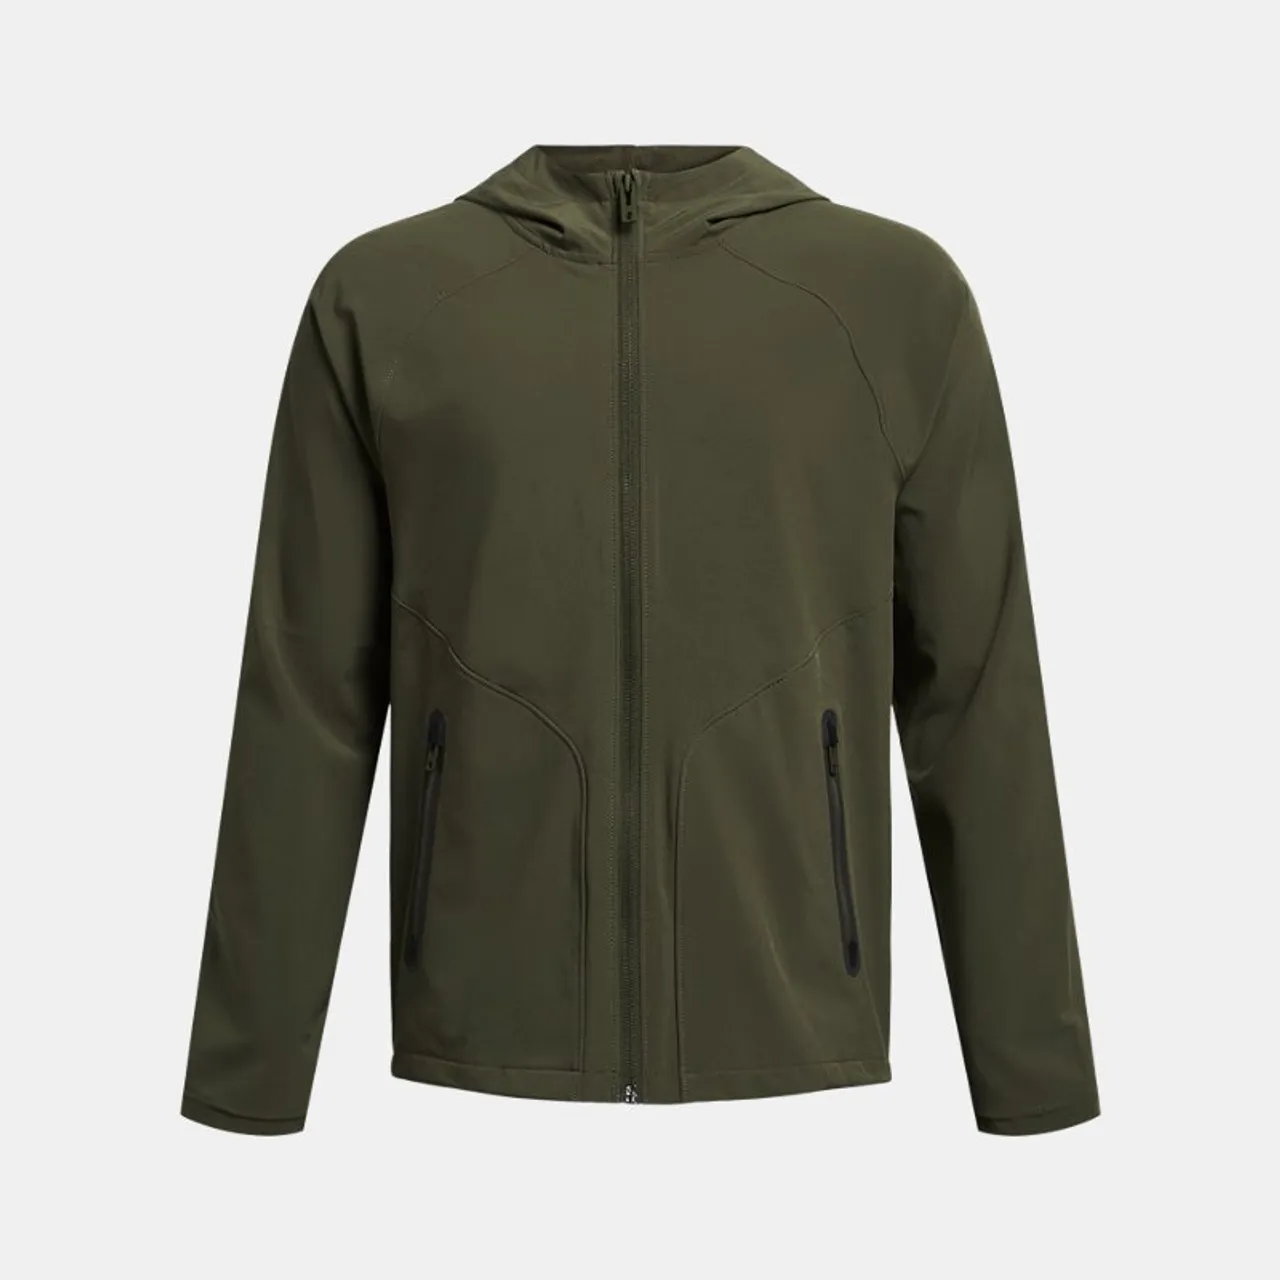 Boys'  Under Armour  Unstoppable Full-Zip Marine OD Green / Black YSM (50 - 54 in)